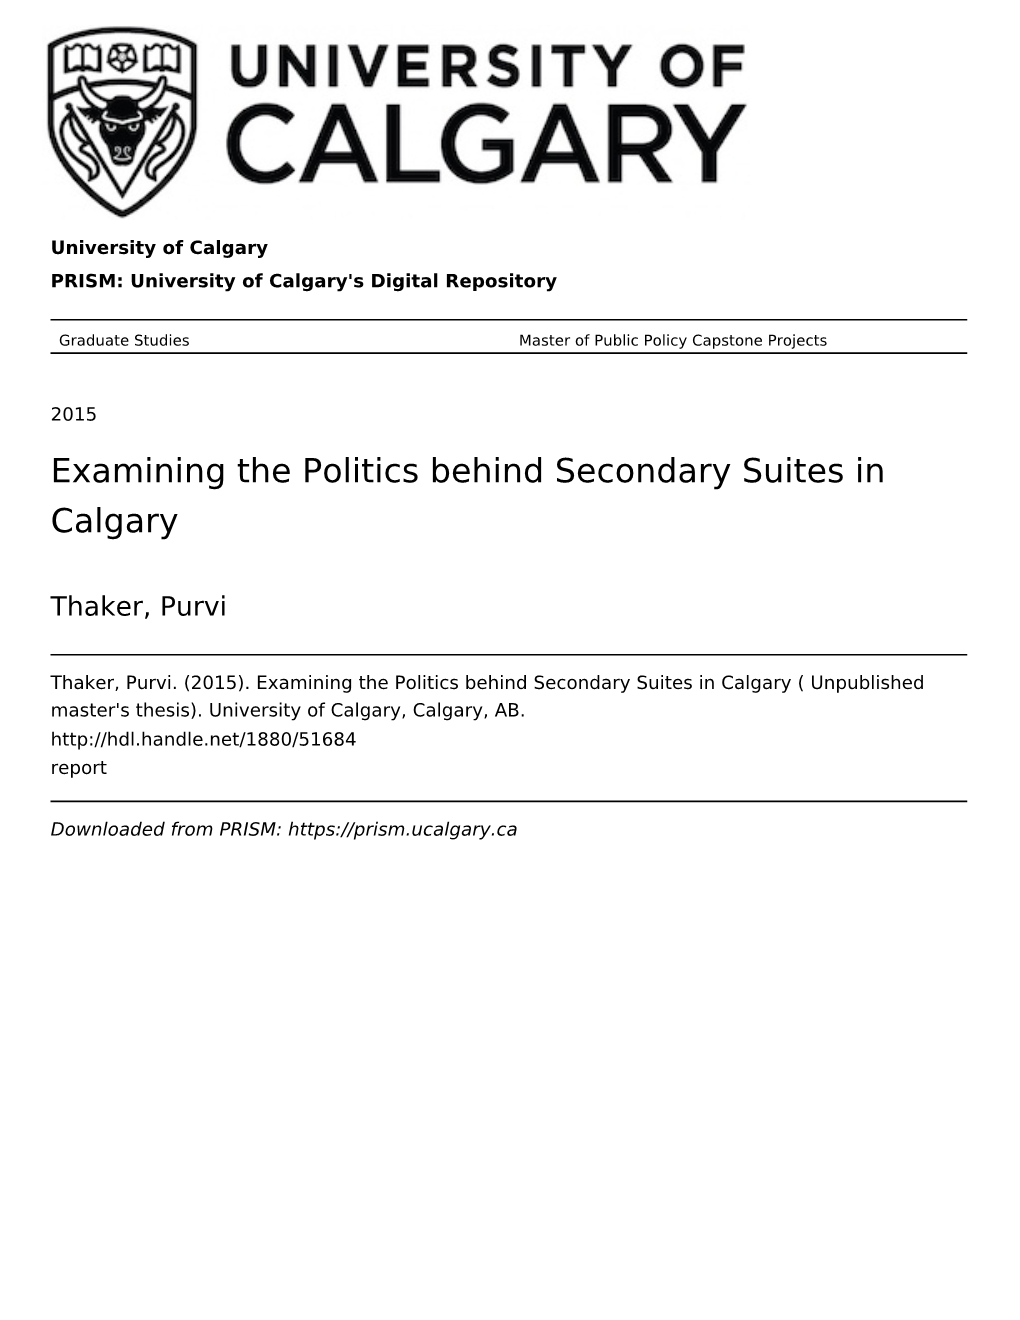 Examining the Politics Behind Secondary Suites in Calgary